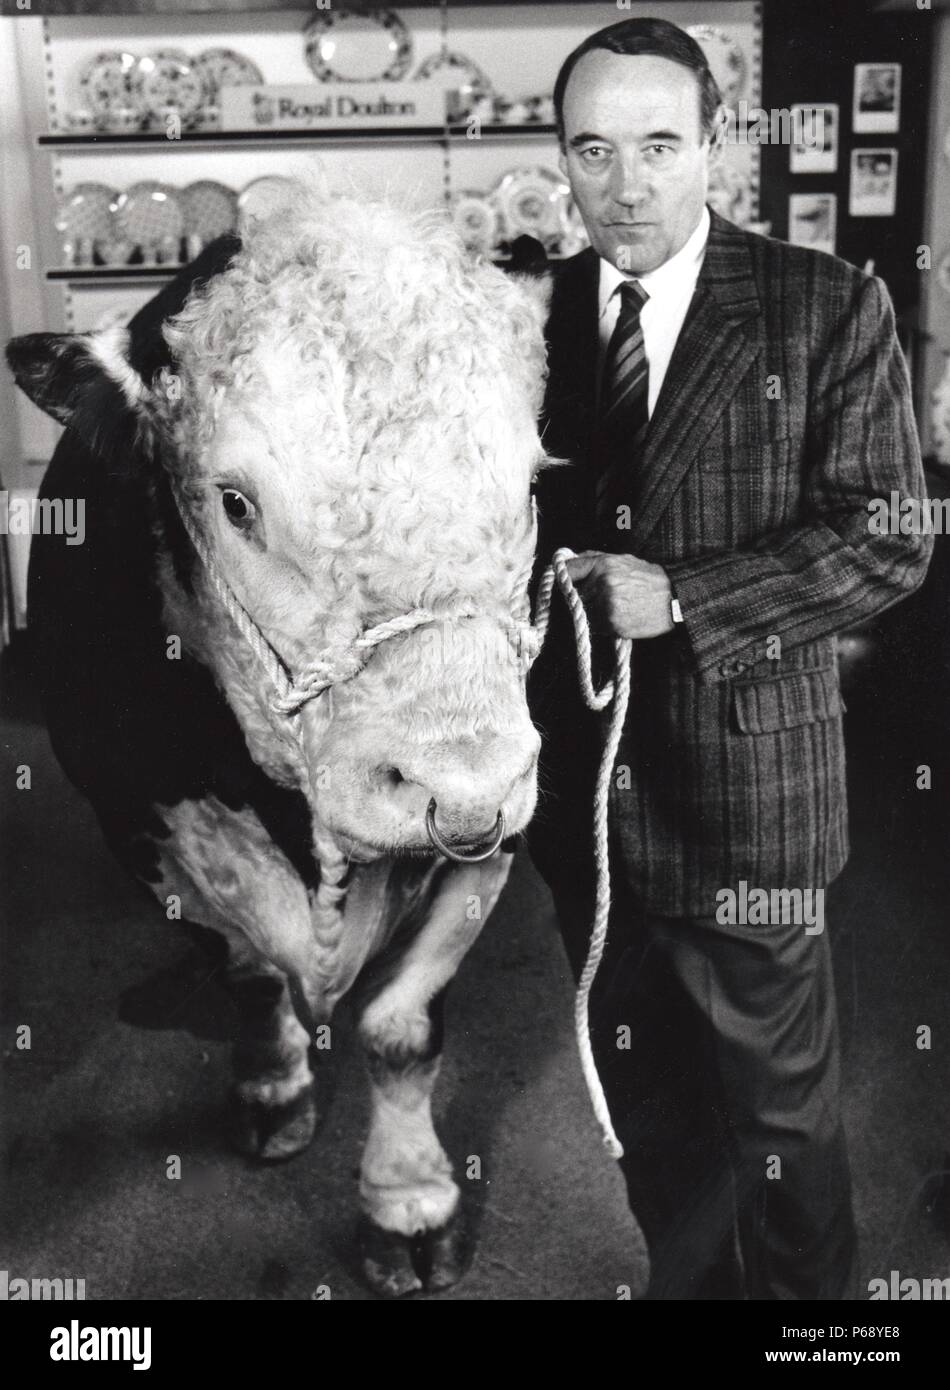 Desmond Morris with a live bull in a china shop in Bristol, for BBC TV programme, Beasts of the Field. 1989. Stock Photo